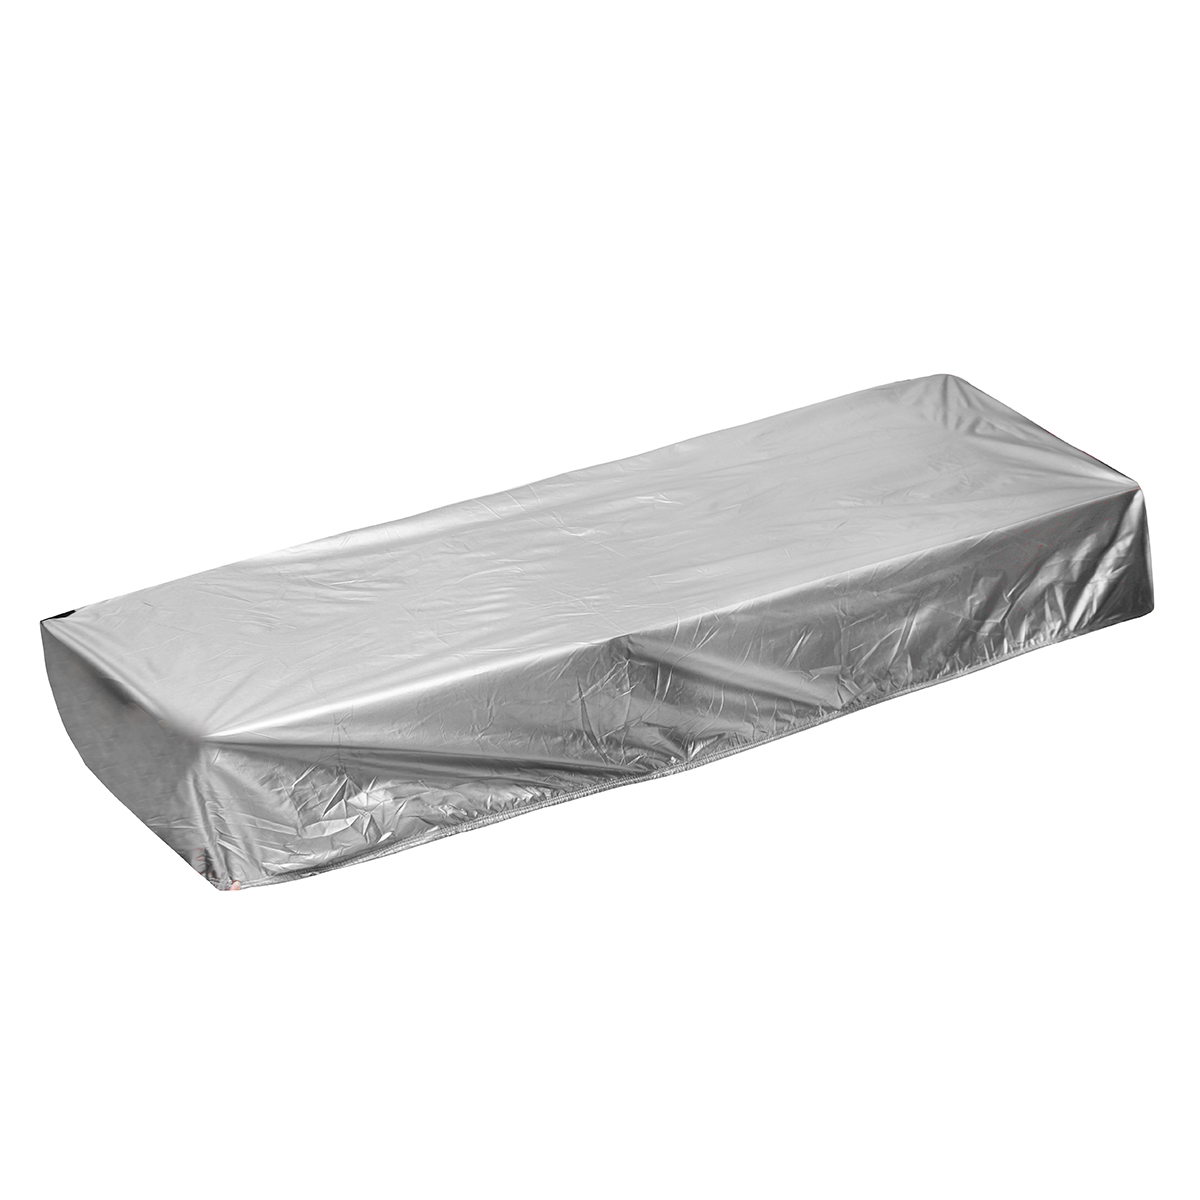 12Ft / 14Ft / 16Ft / 18Ft Jon Boat Cover 210D Waterproof Sun Protection Silver